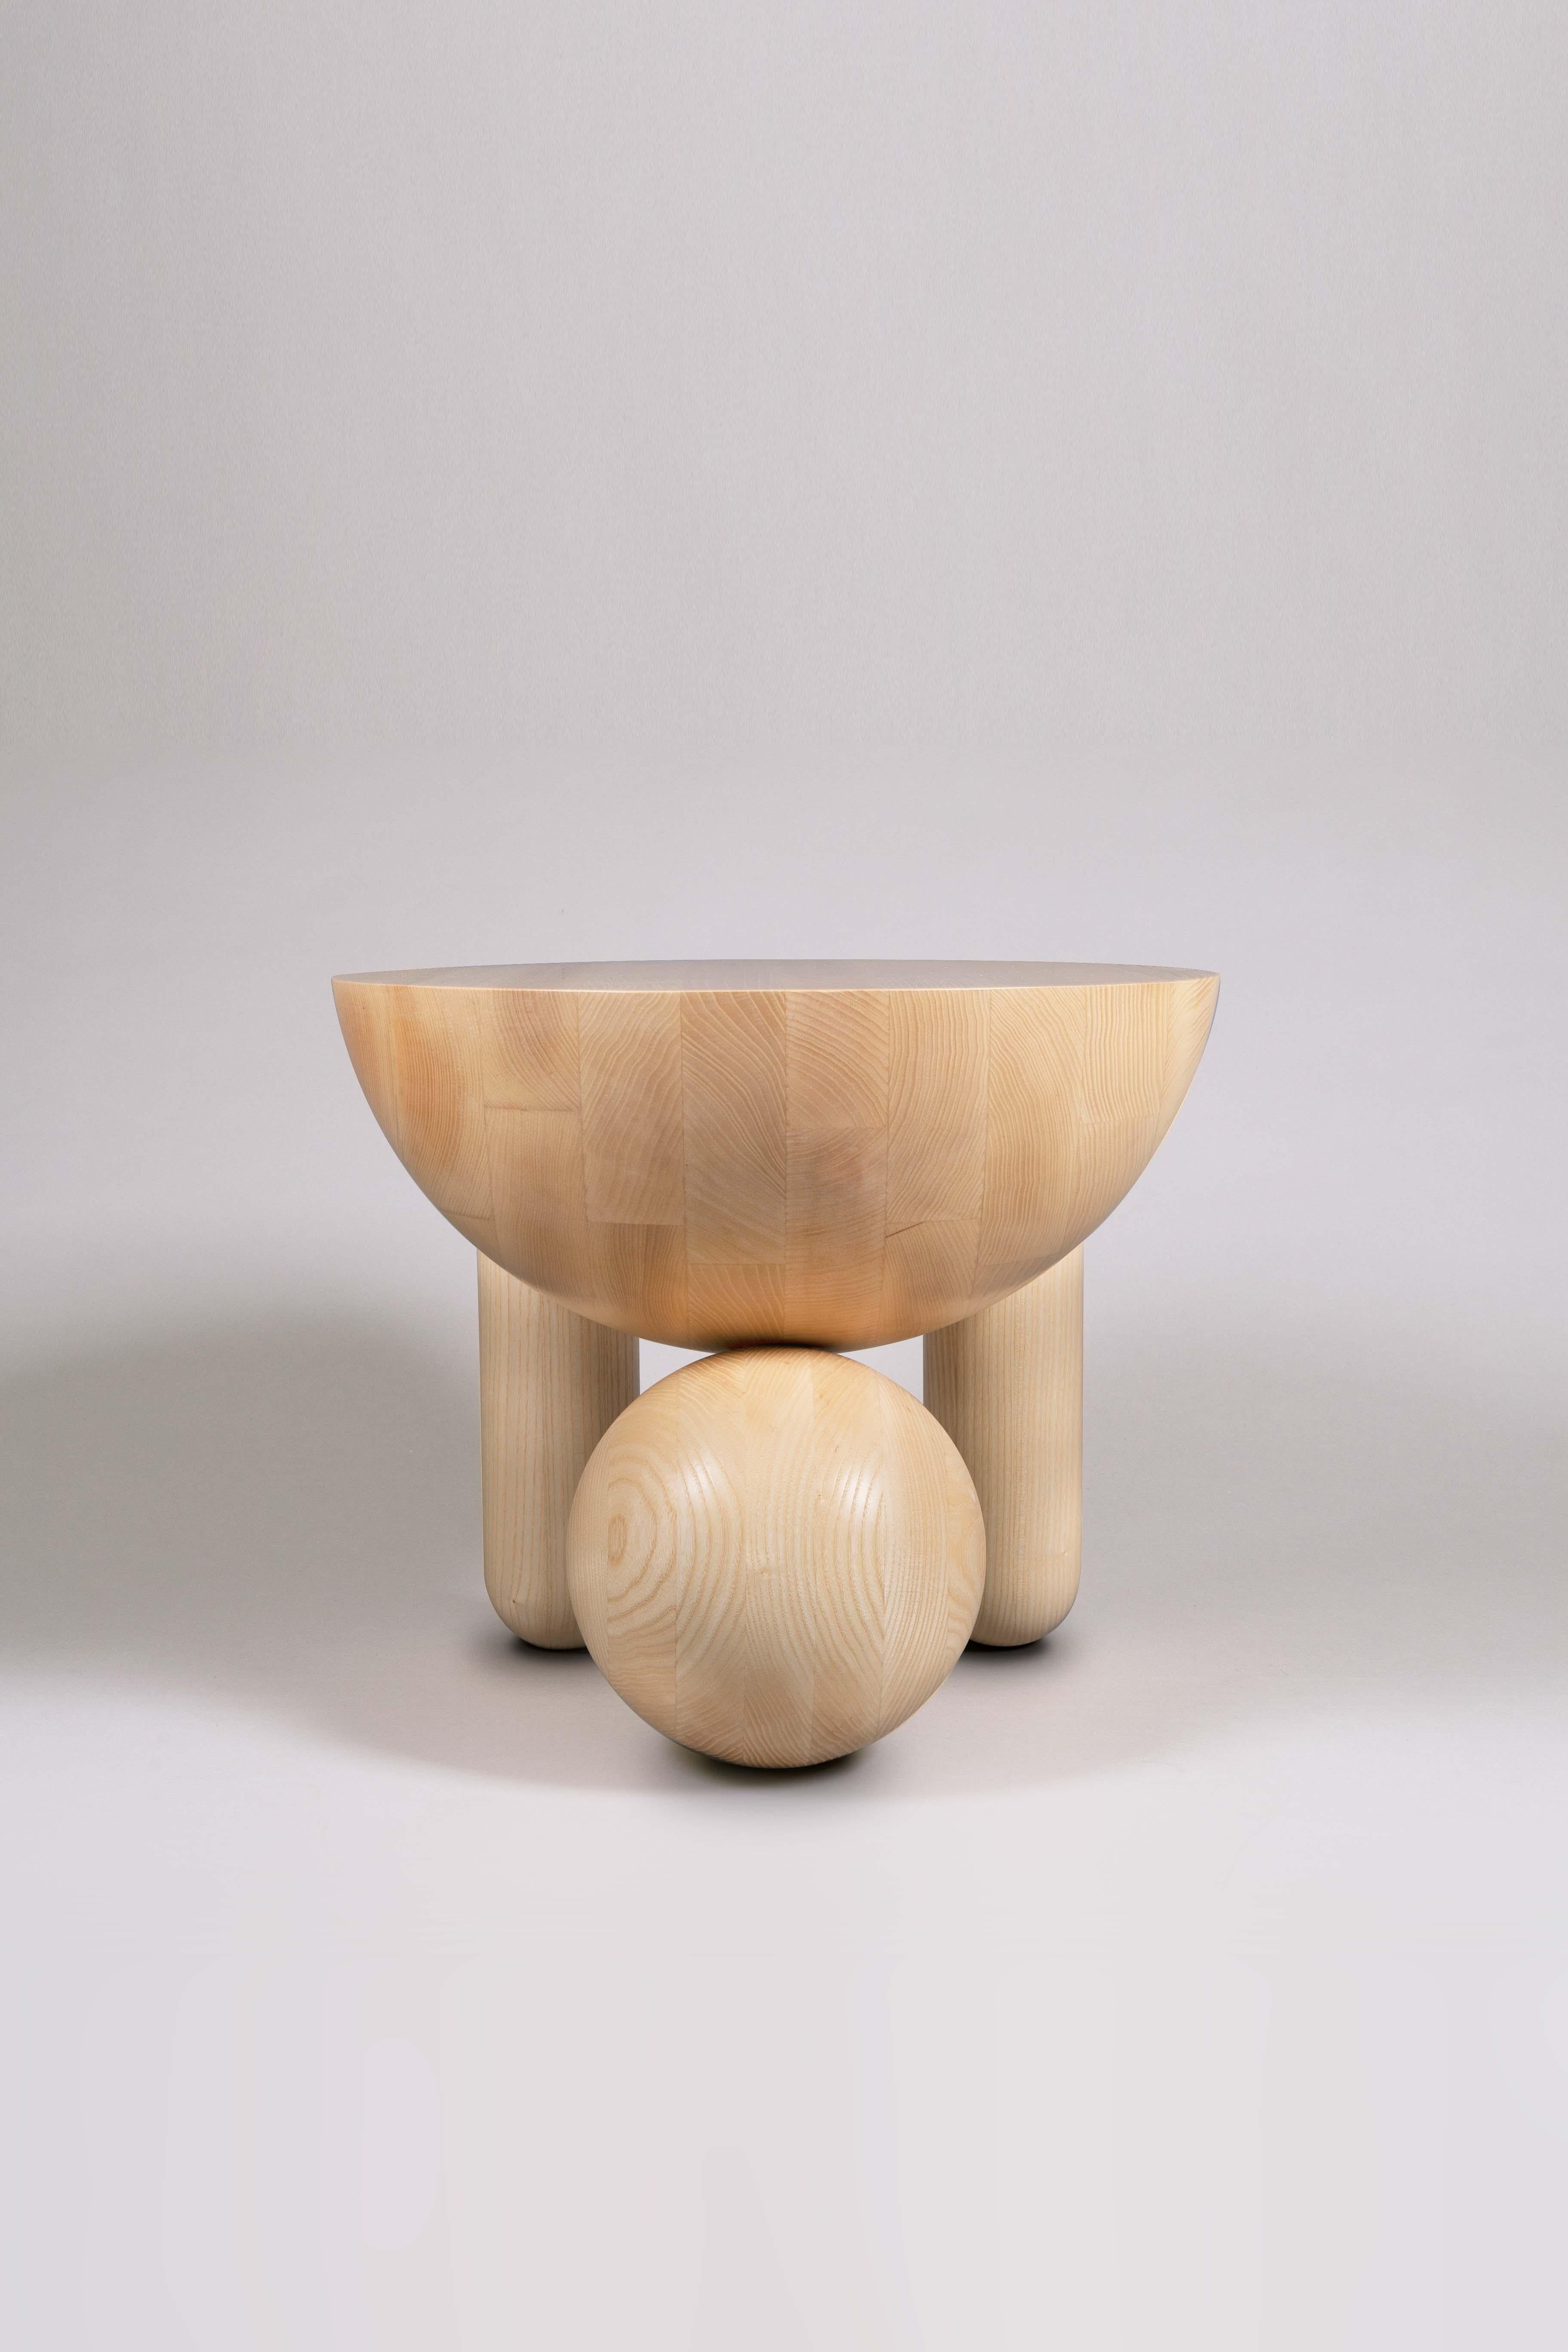 Modern Profiterole Small Coffee Table by Lara Bohinc in Natural Finish Wood, in Stock For Sale